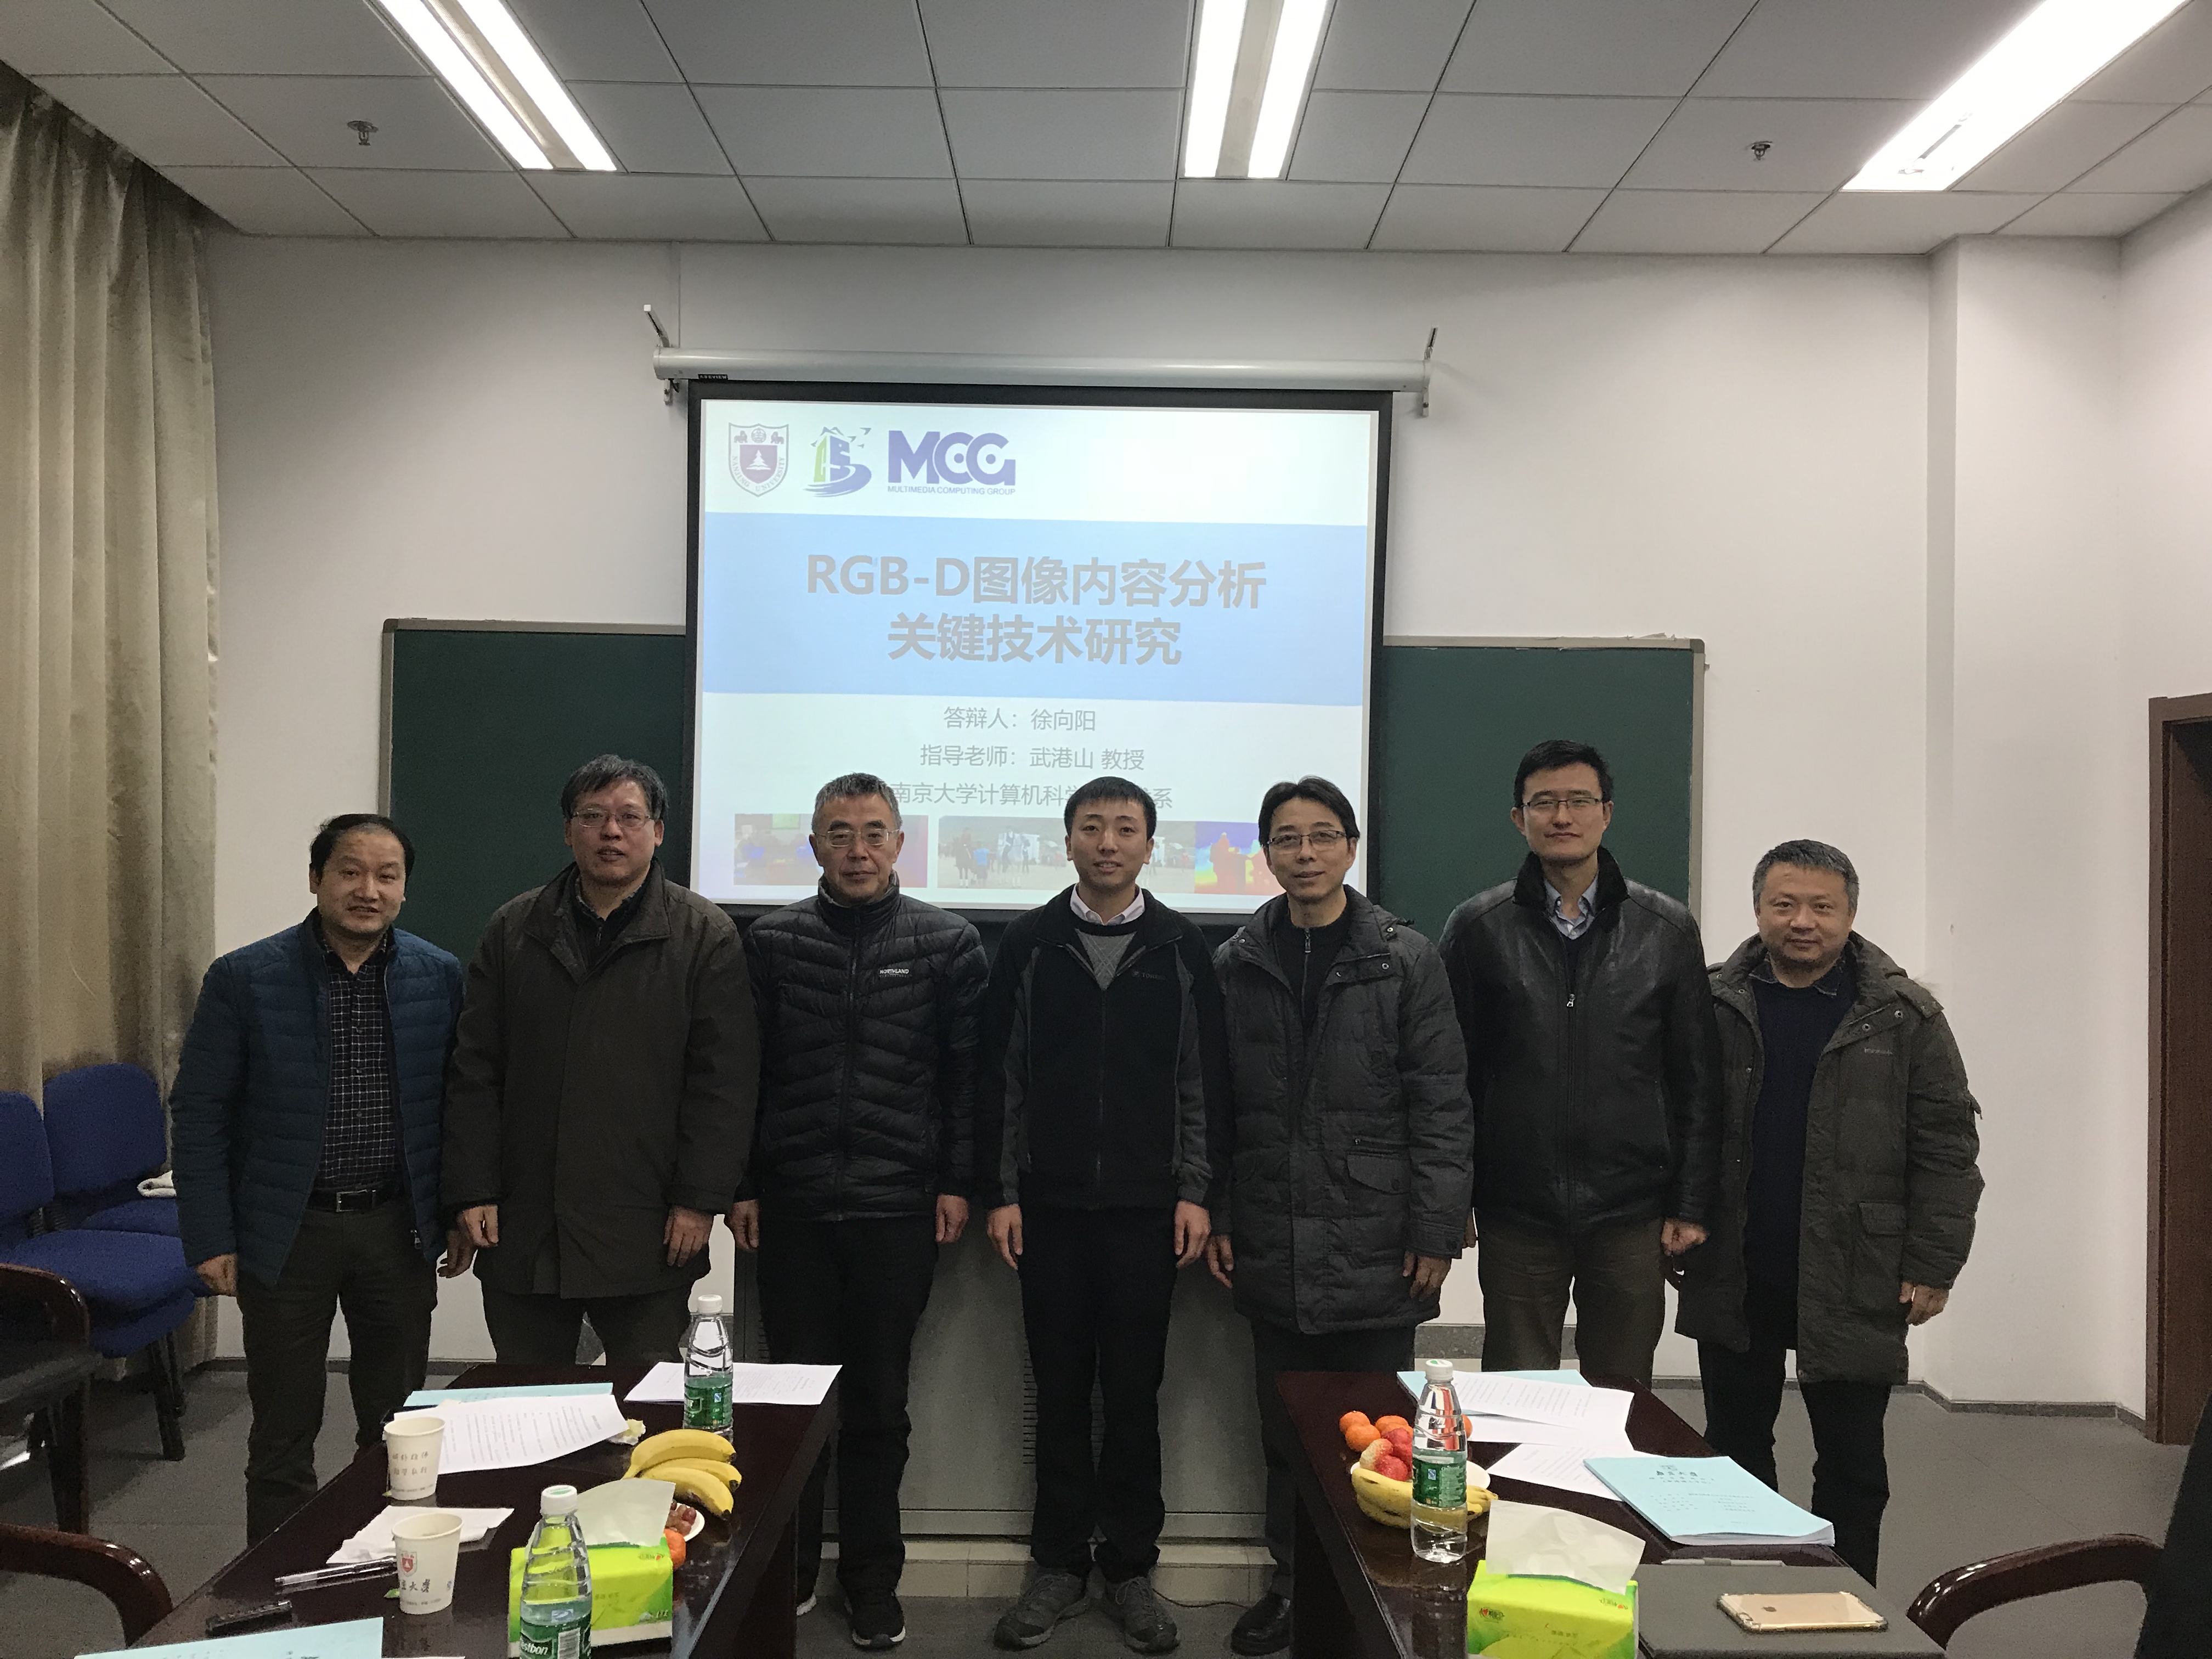 Doctoral defence of Xiangyang Xu